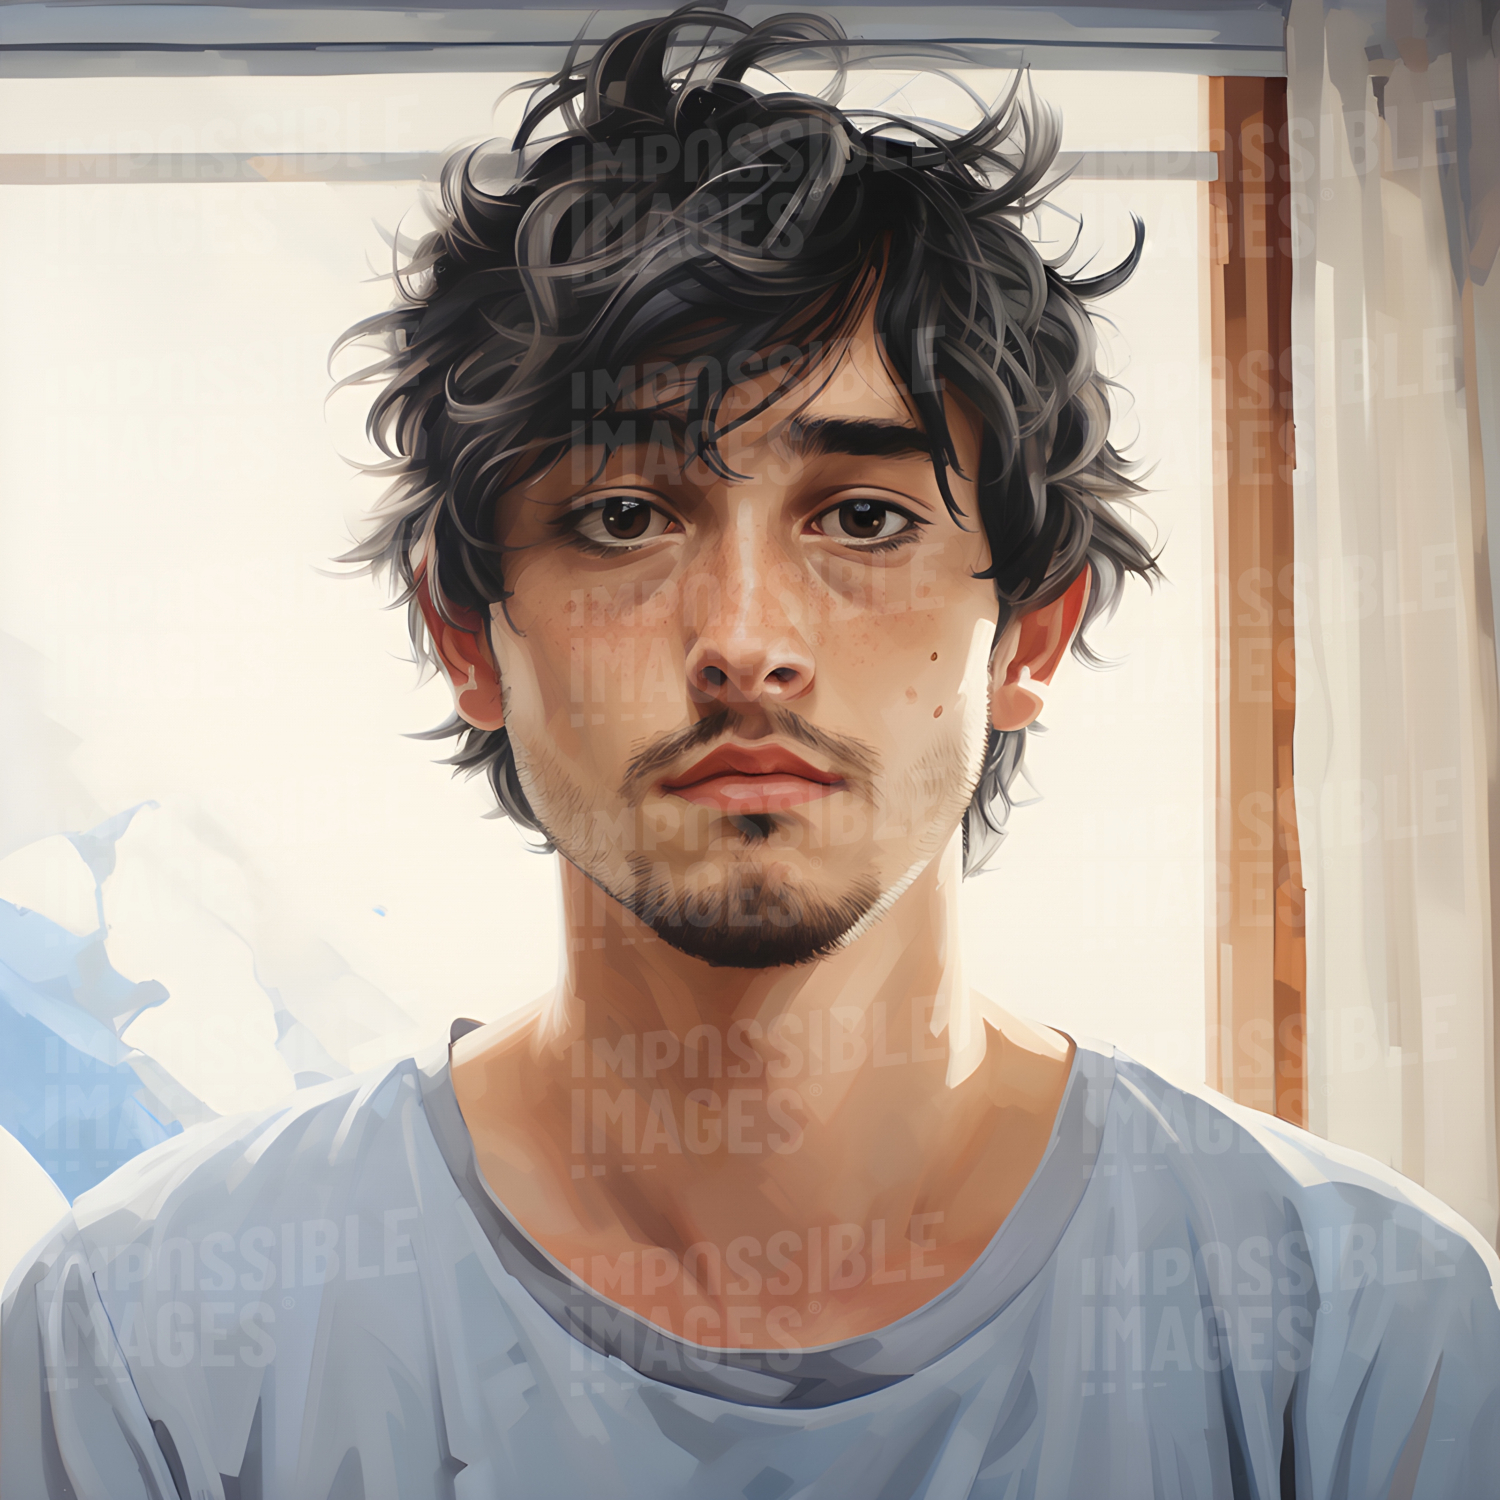 Striking painted portrait of a young man with dark messy hair